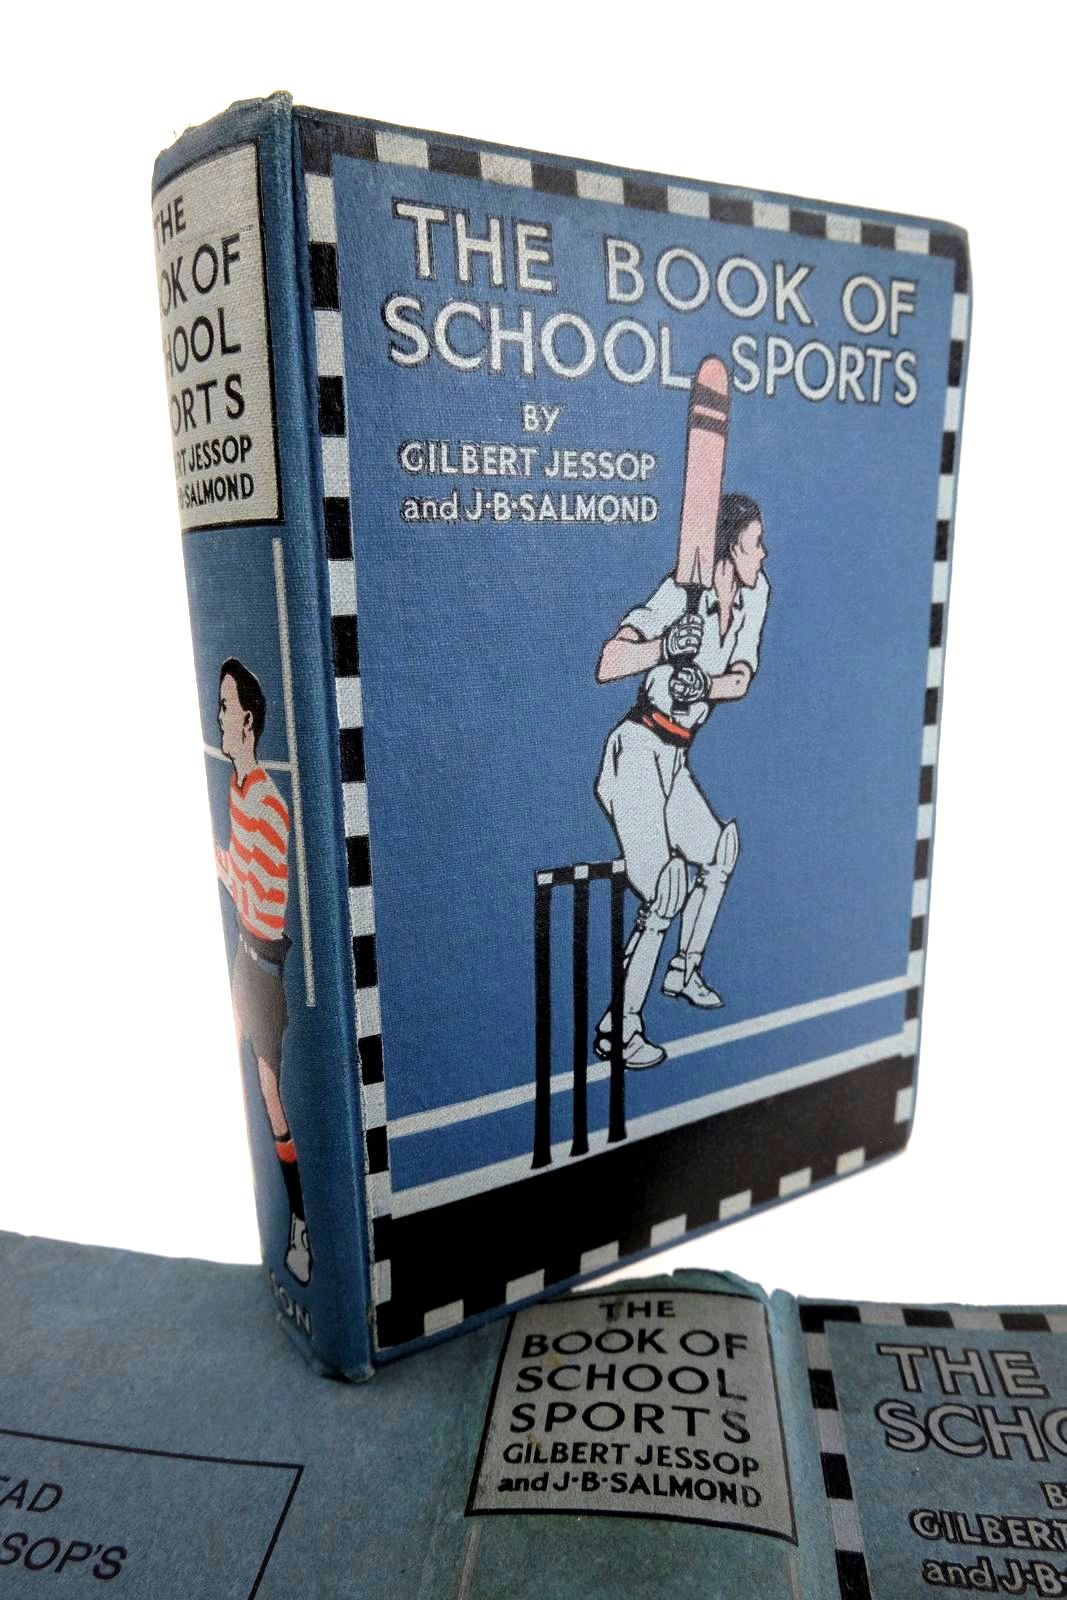 Photo of THE BOOK OF SCHOOL SPORTS written by Jessop, Gilbert
Salmond, James B. published by Thomas Nelson and Sons Ltd. (STOCK CODE: 1324192)  for sale by Stella & Rose's Books